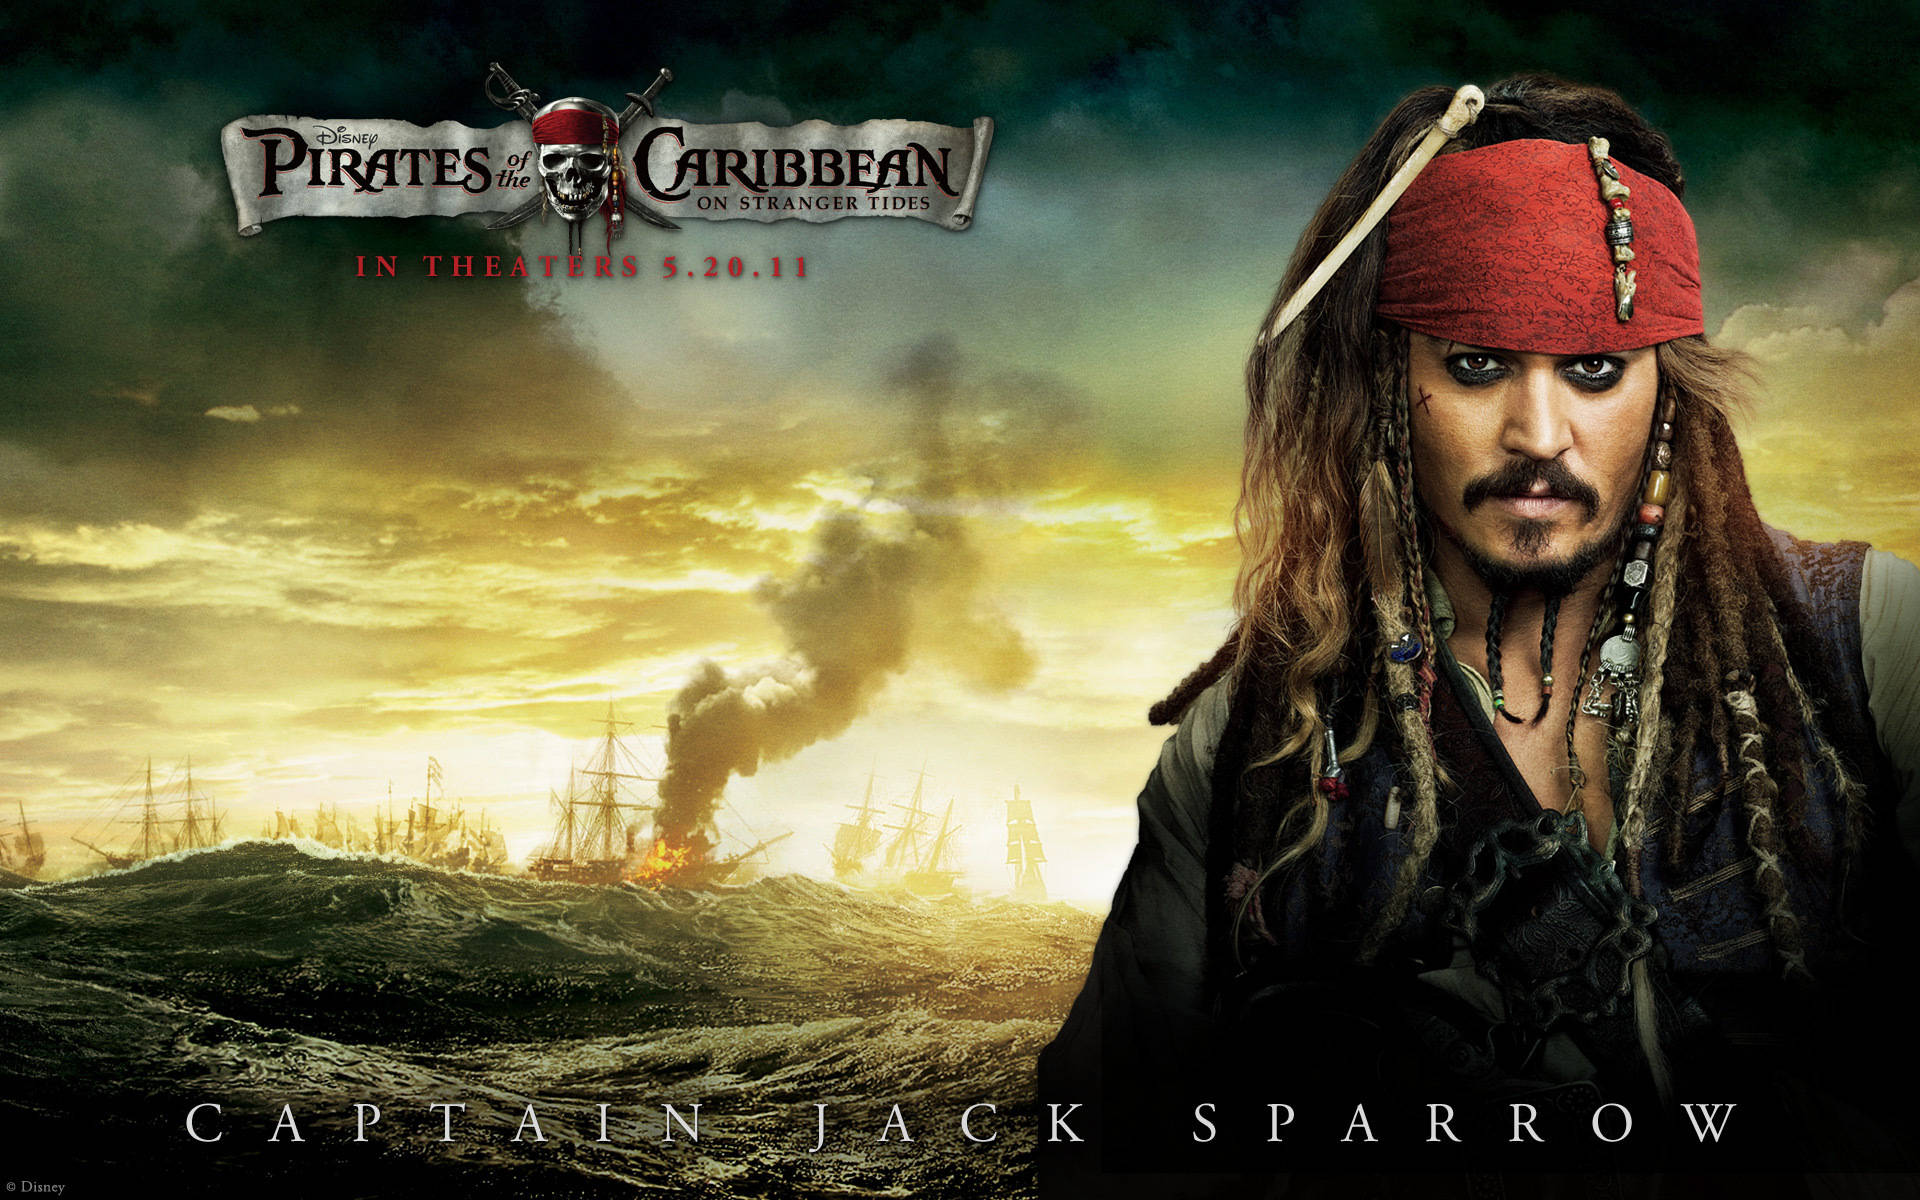 100+] Jack Sparrow Wallpapers